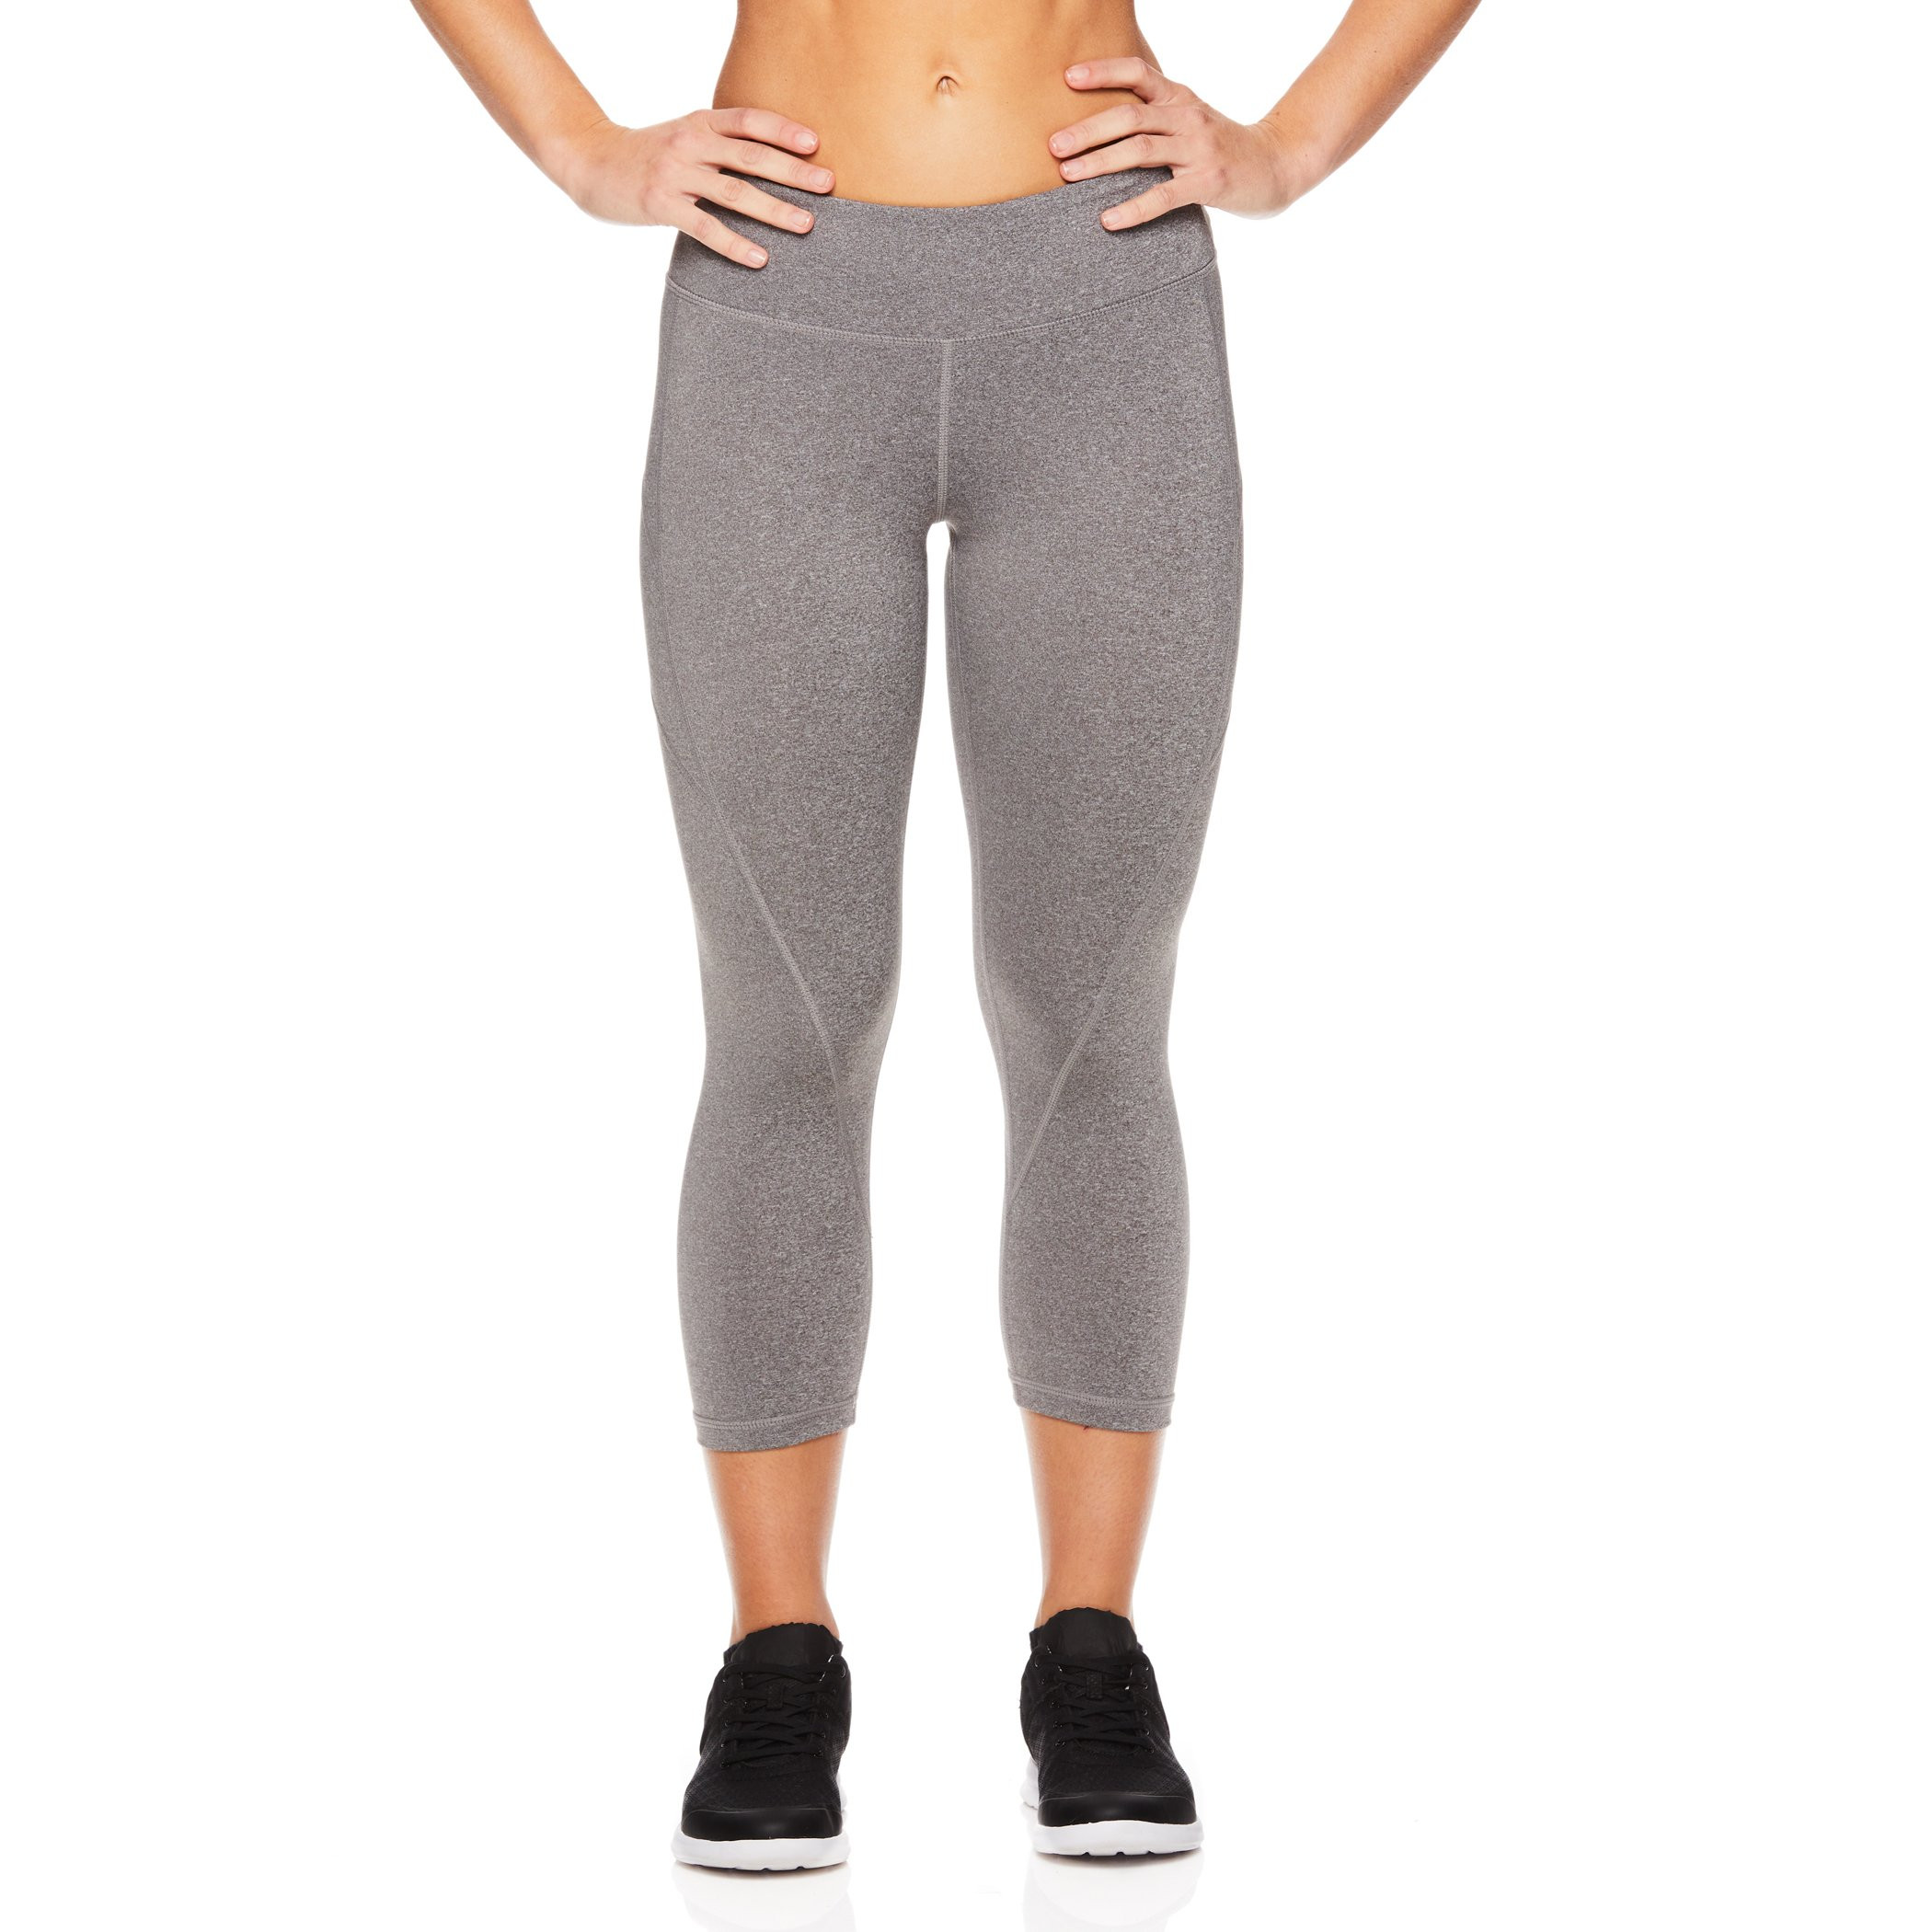 These athletic capris are the perfect fitted capri for when you want to add some fun and color to your athleisure wardrobe. Product Features VERSATILE: Reebok workout capris are perfect for yoga, running, and everything in between. Never miss a beat with #capri